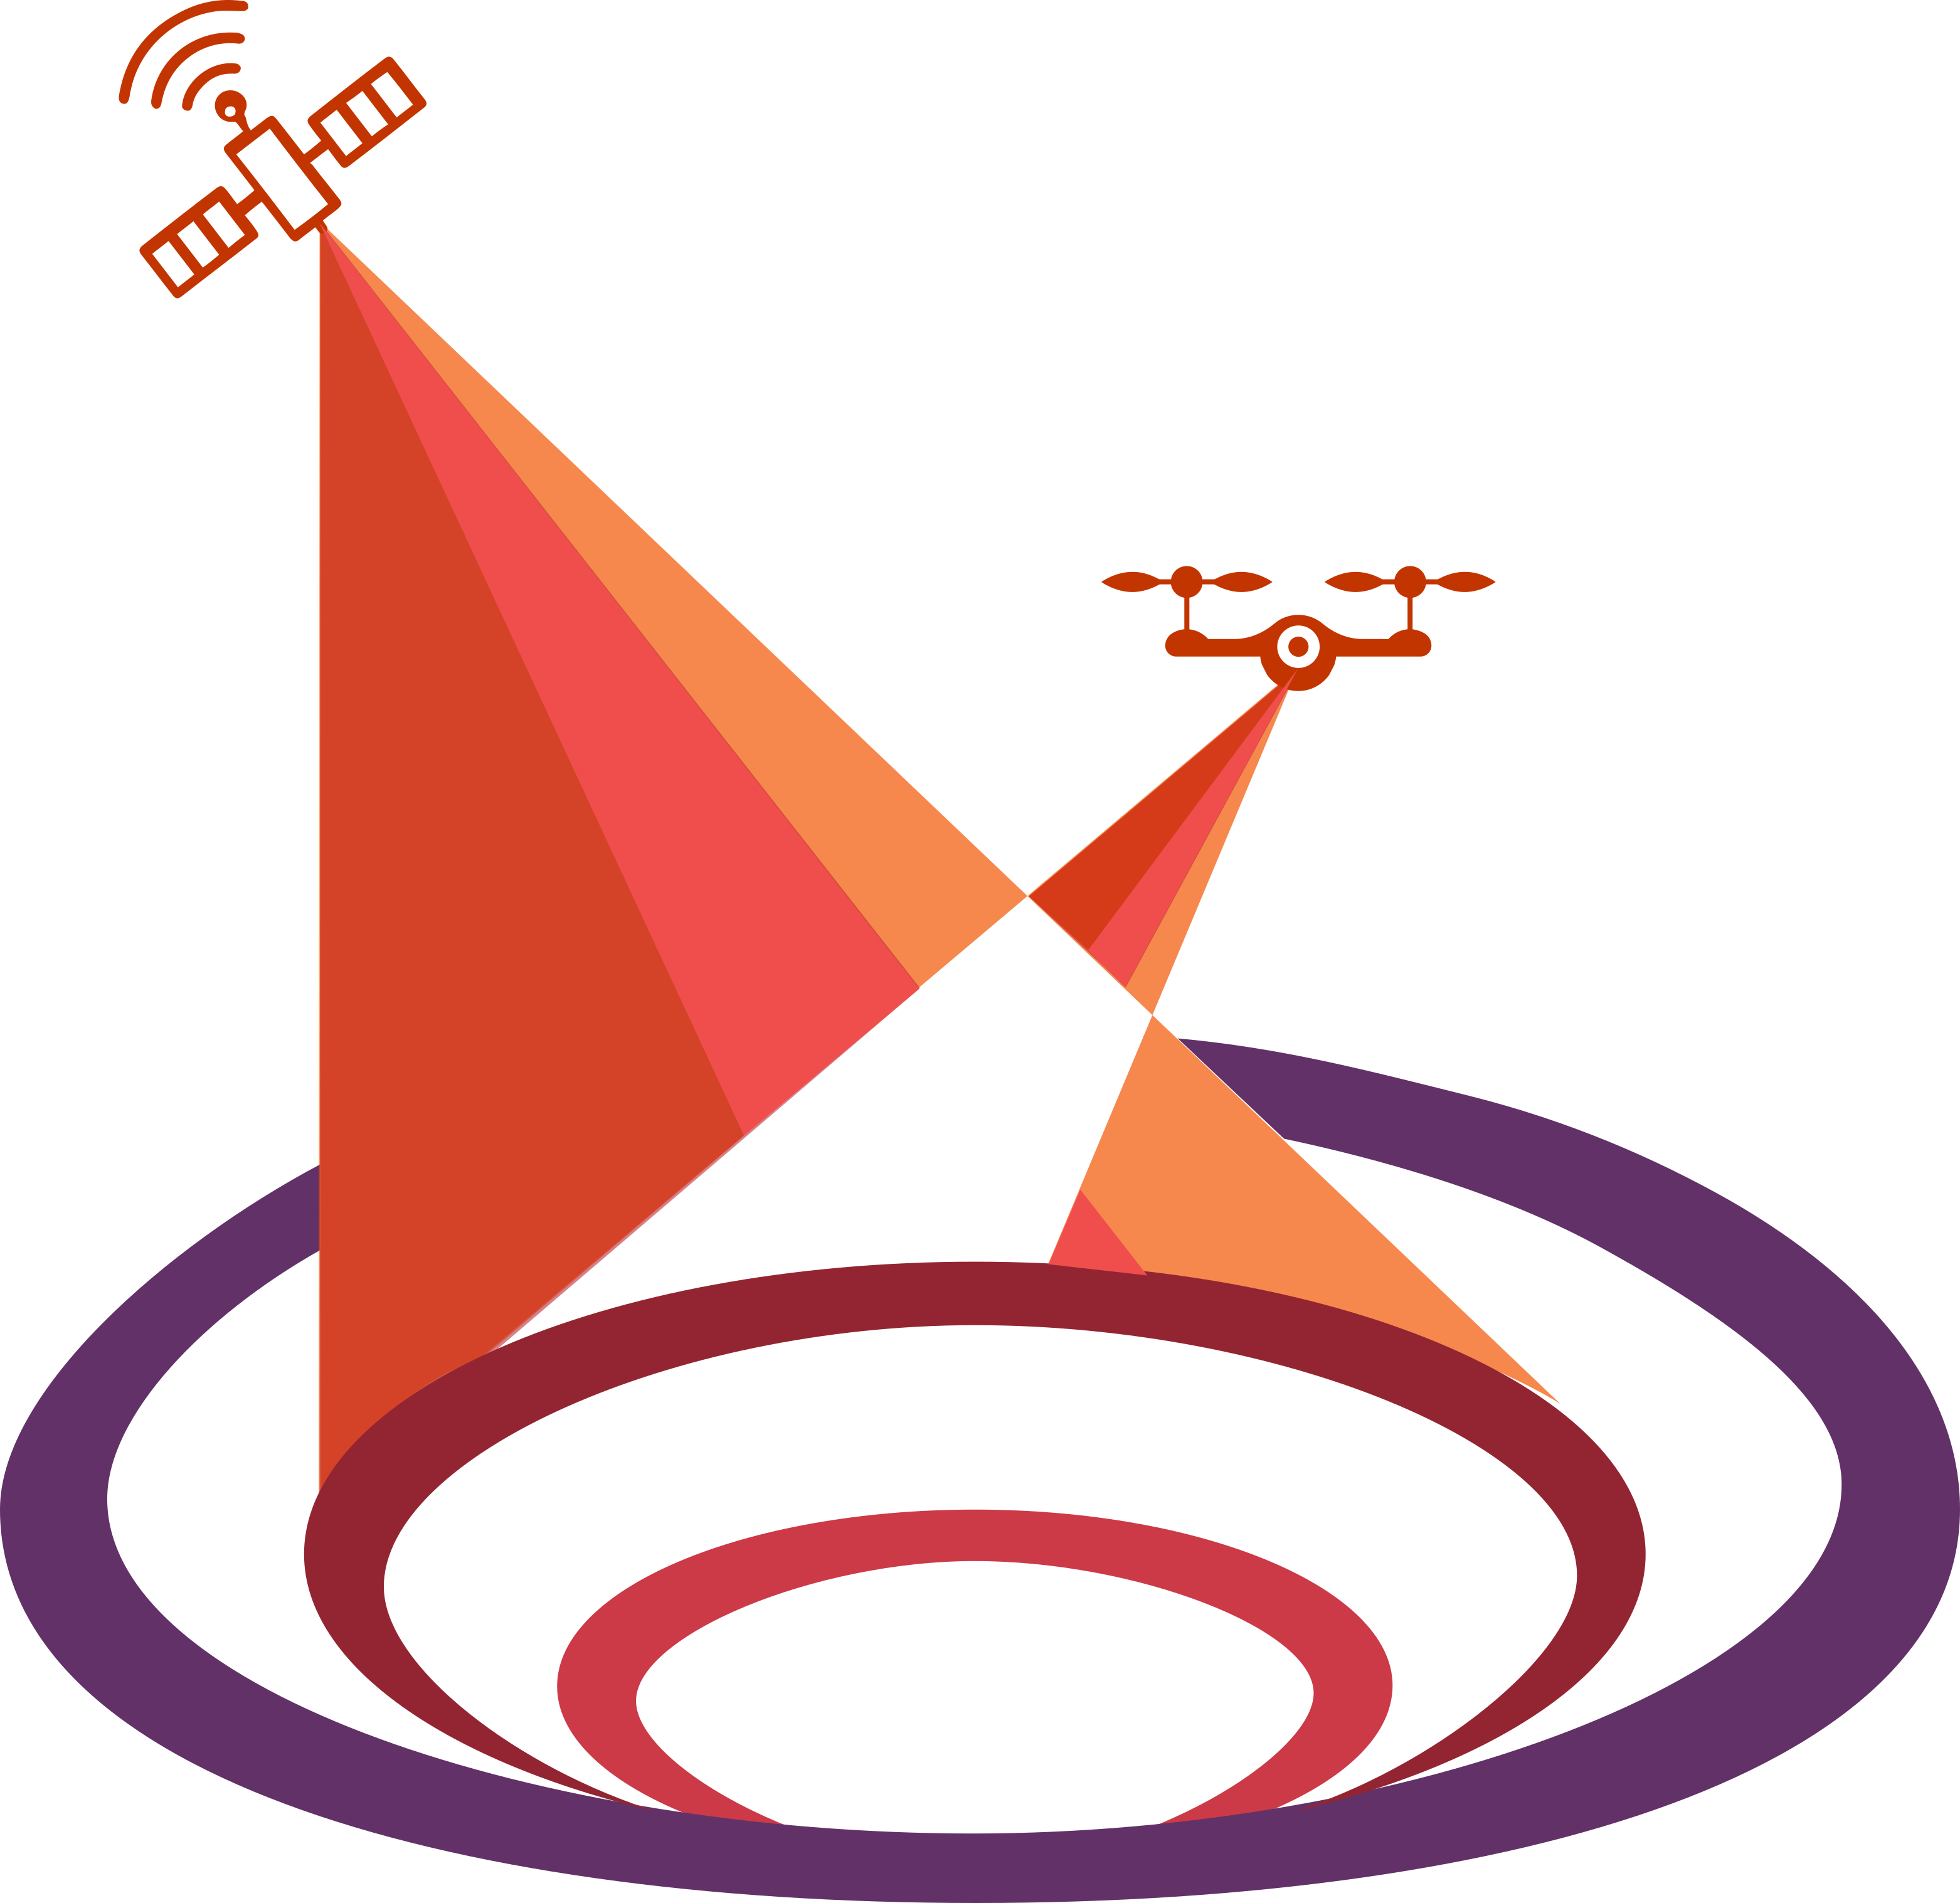 m4mining logo, a stylized satellite and drone flying above an open pit in orange, red and purple